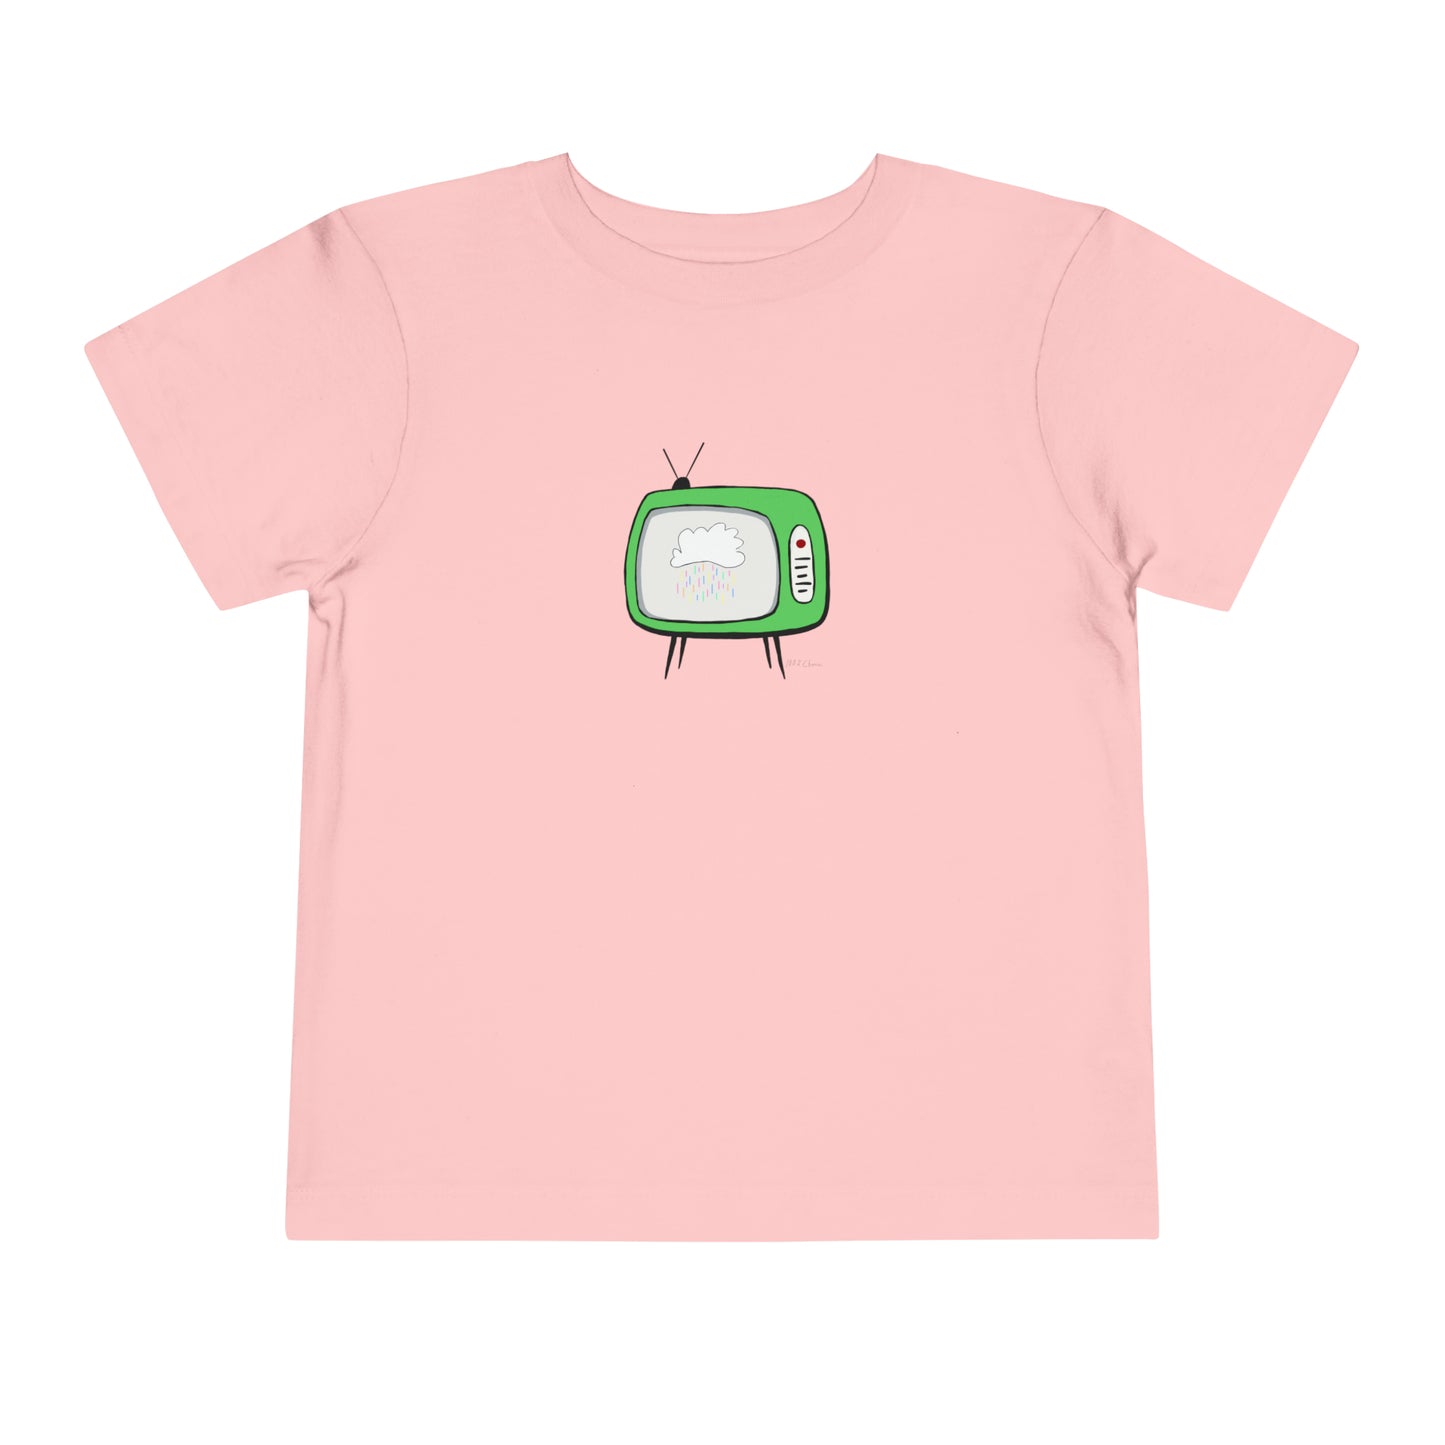 100% Chance of Sprinkles Toddler Tee